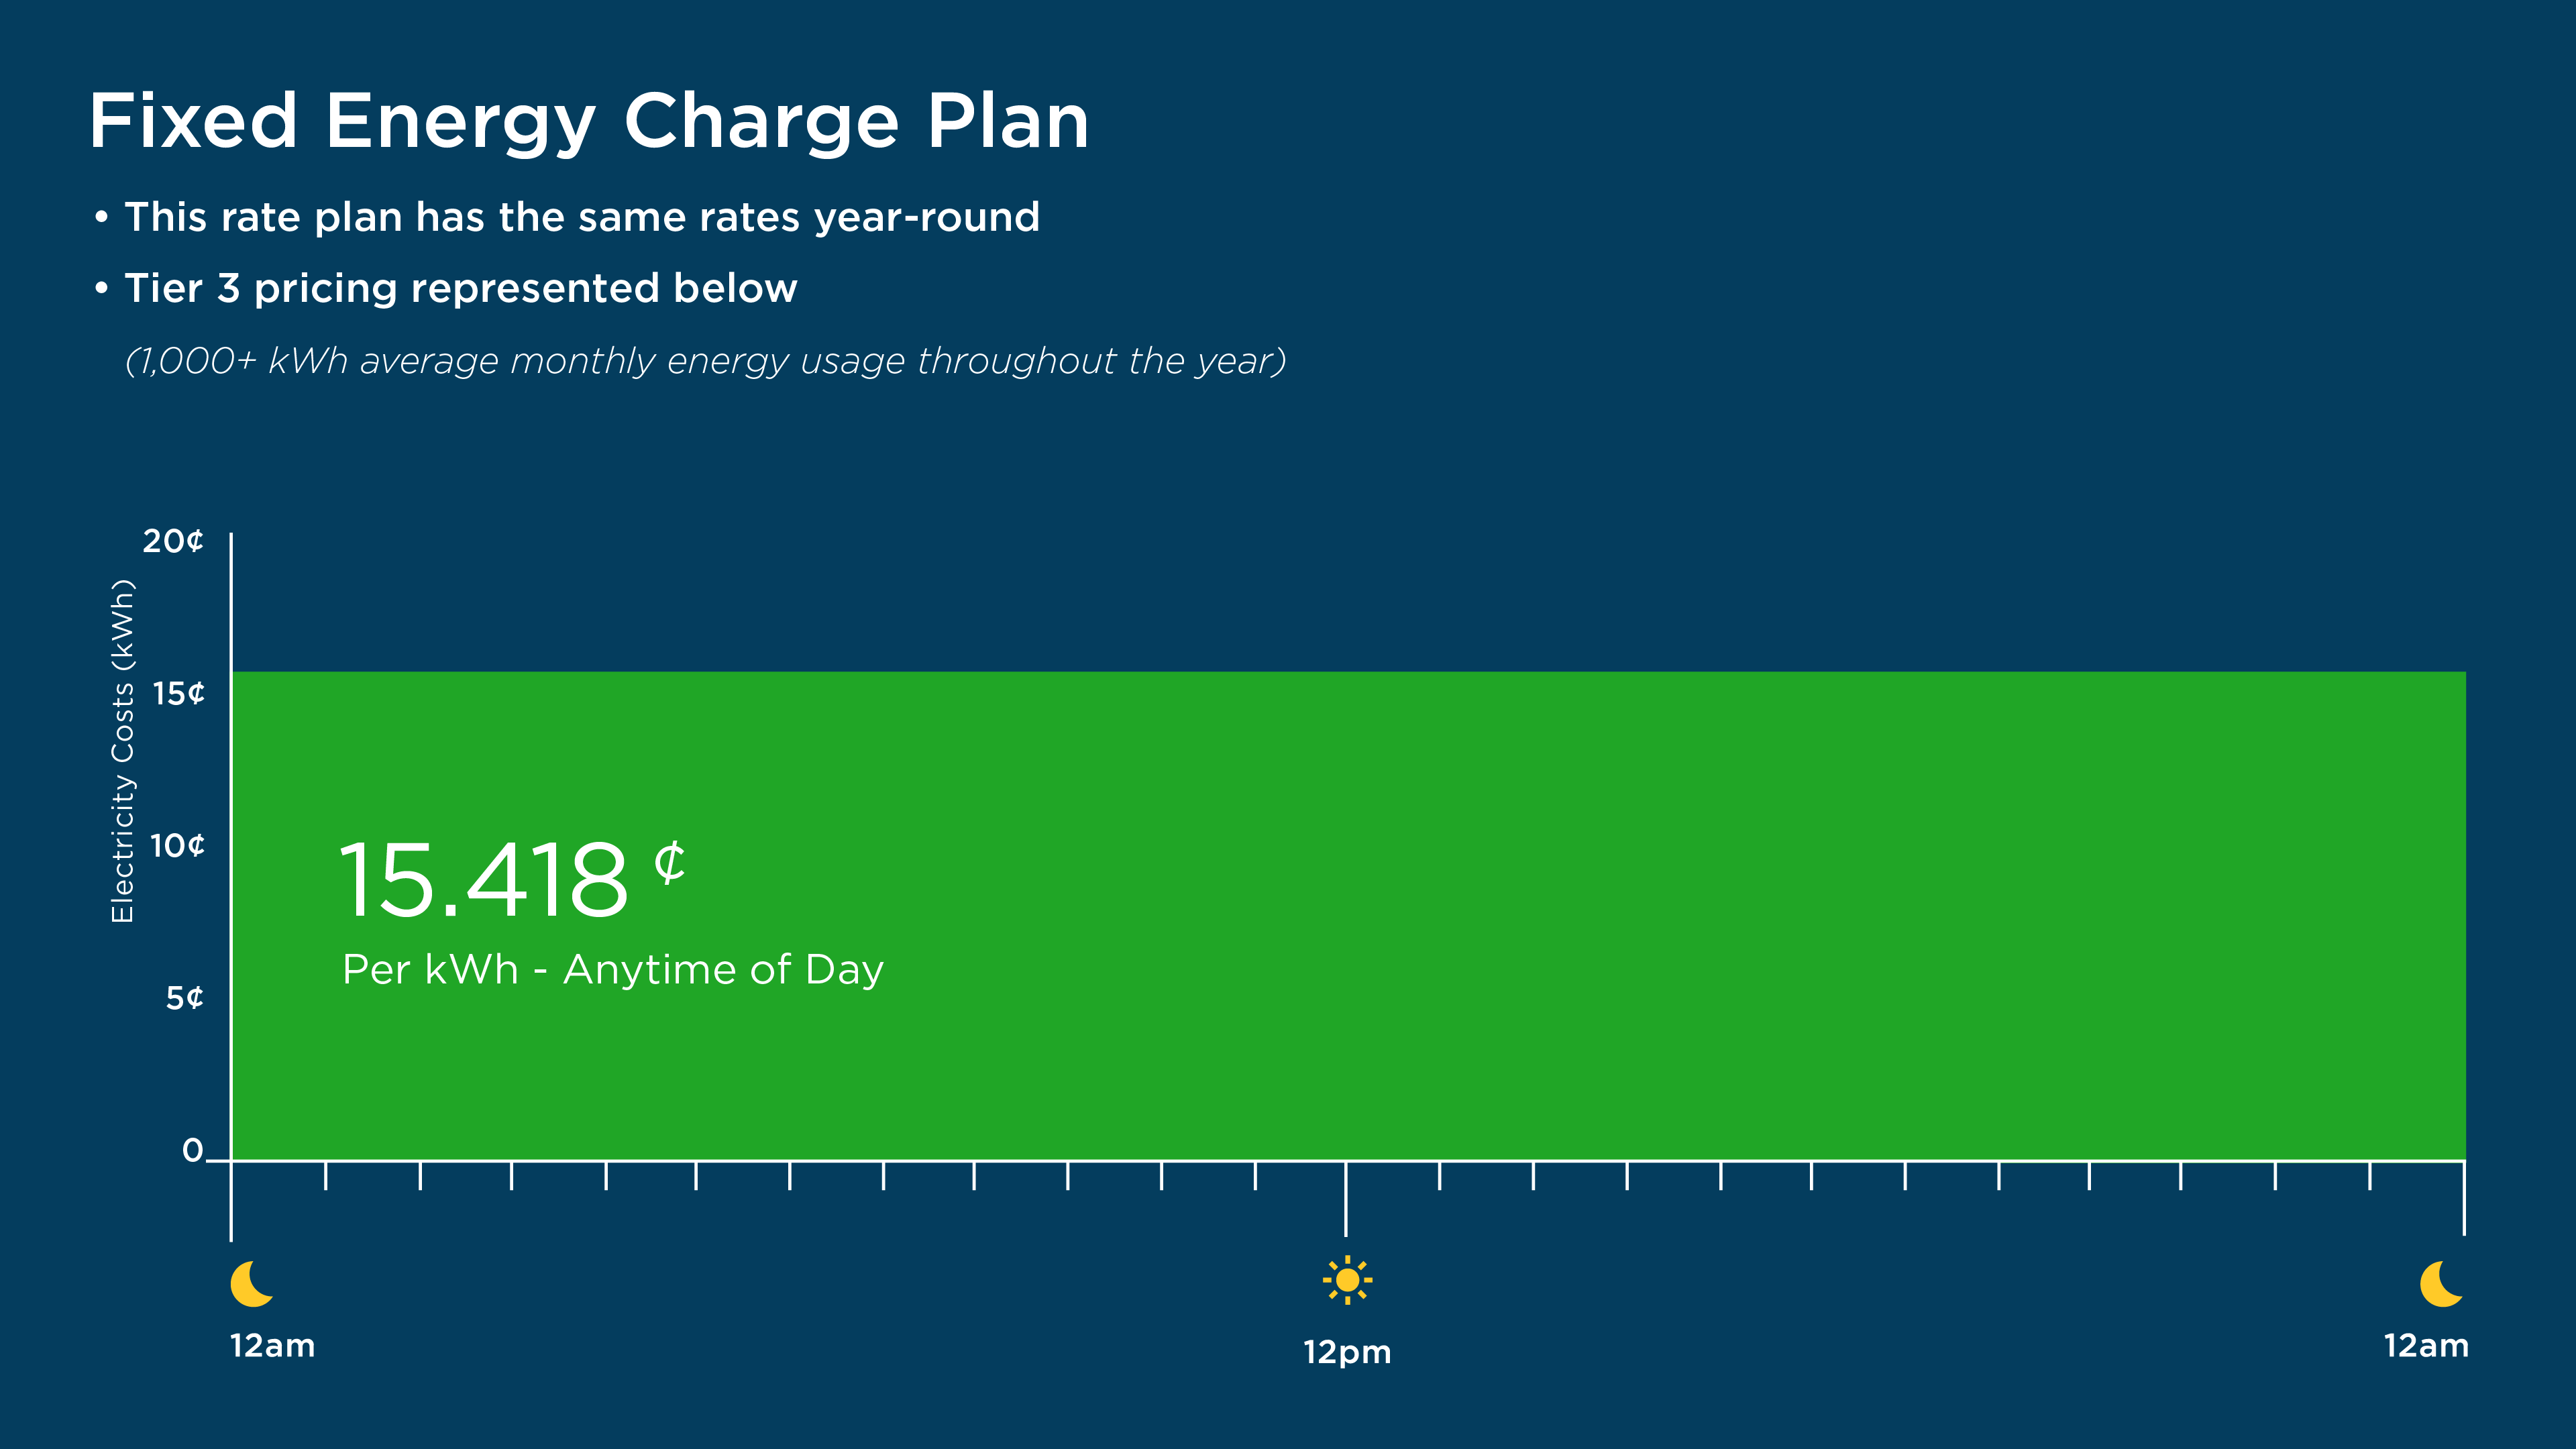 Fixed Energy Charge Plan infographic